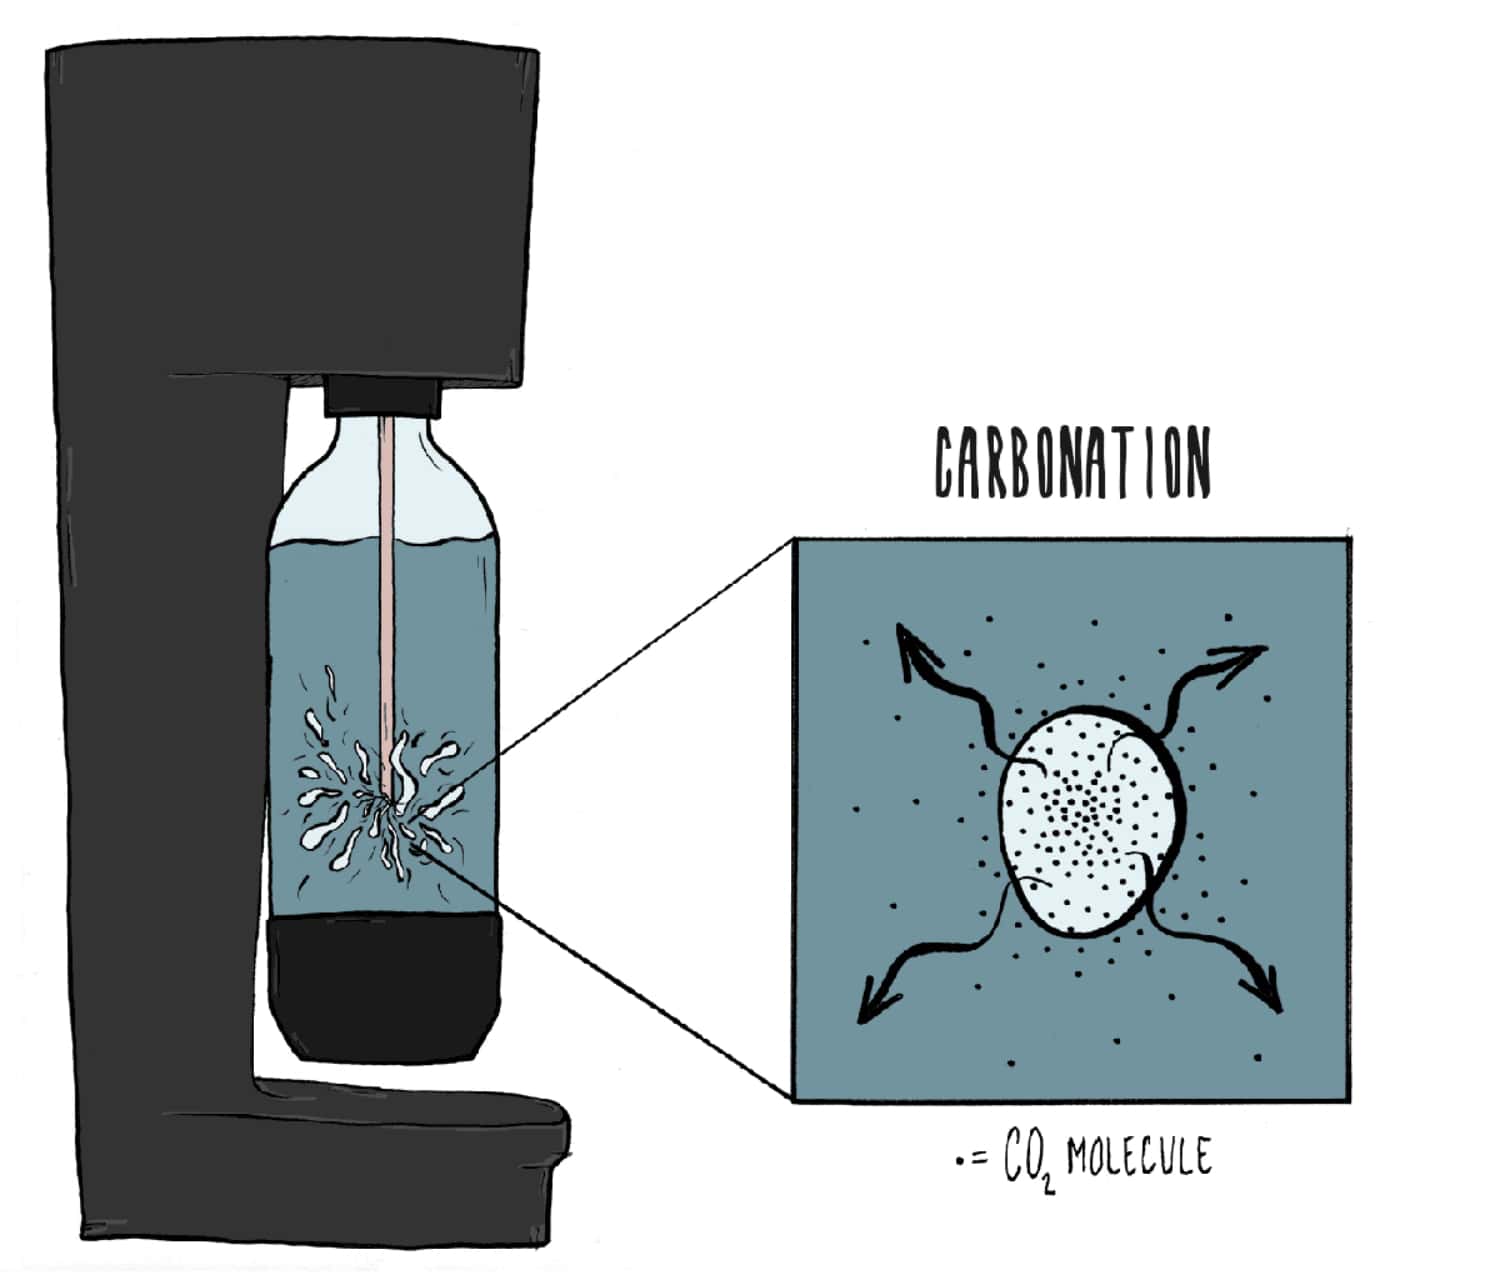 carbonation means for taste and surface